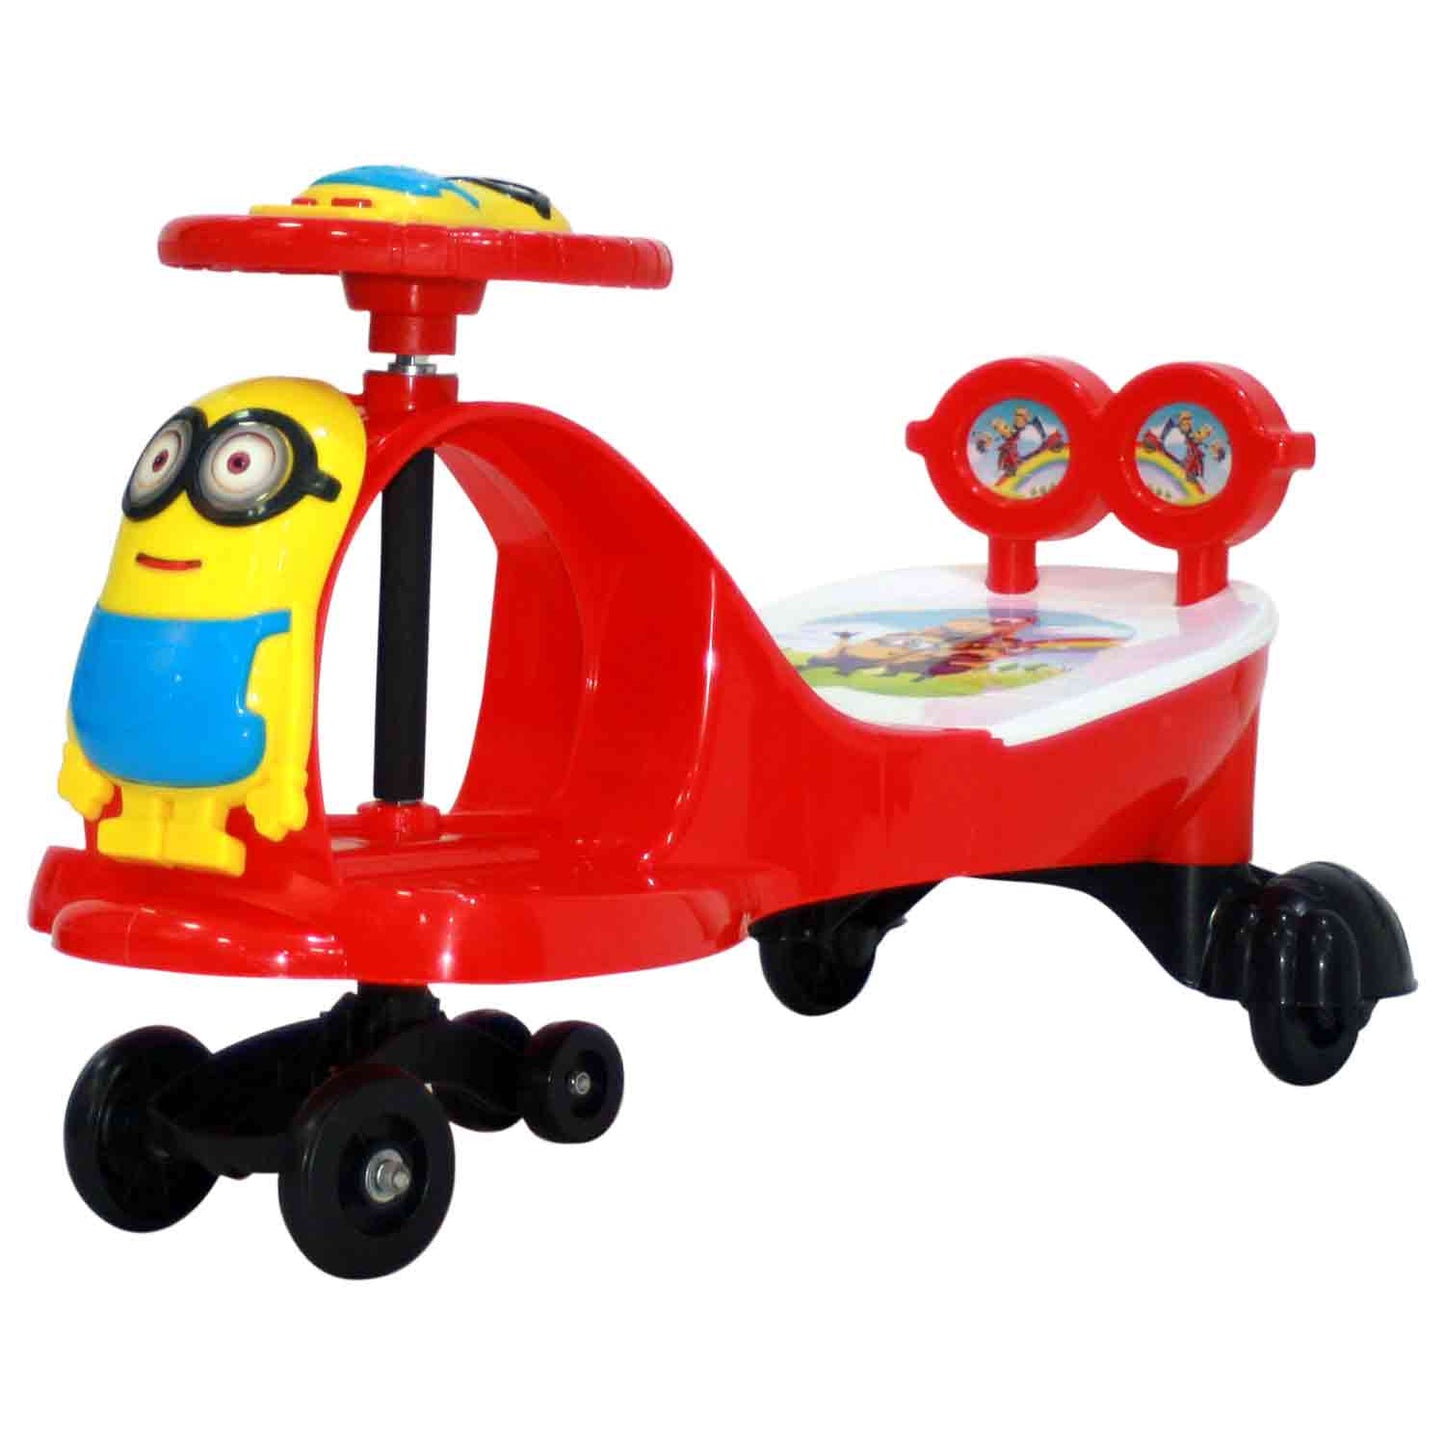 Minion Magic Car(Without Packing)